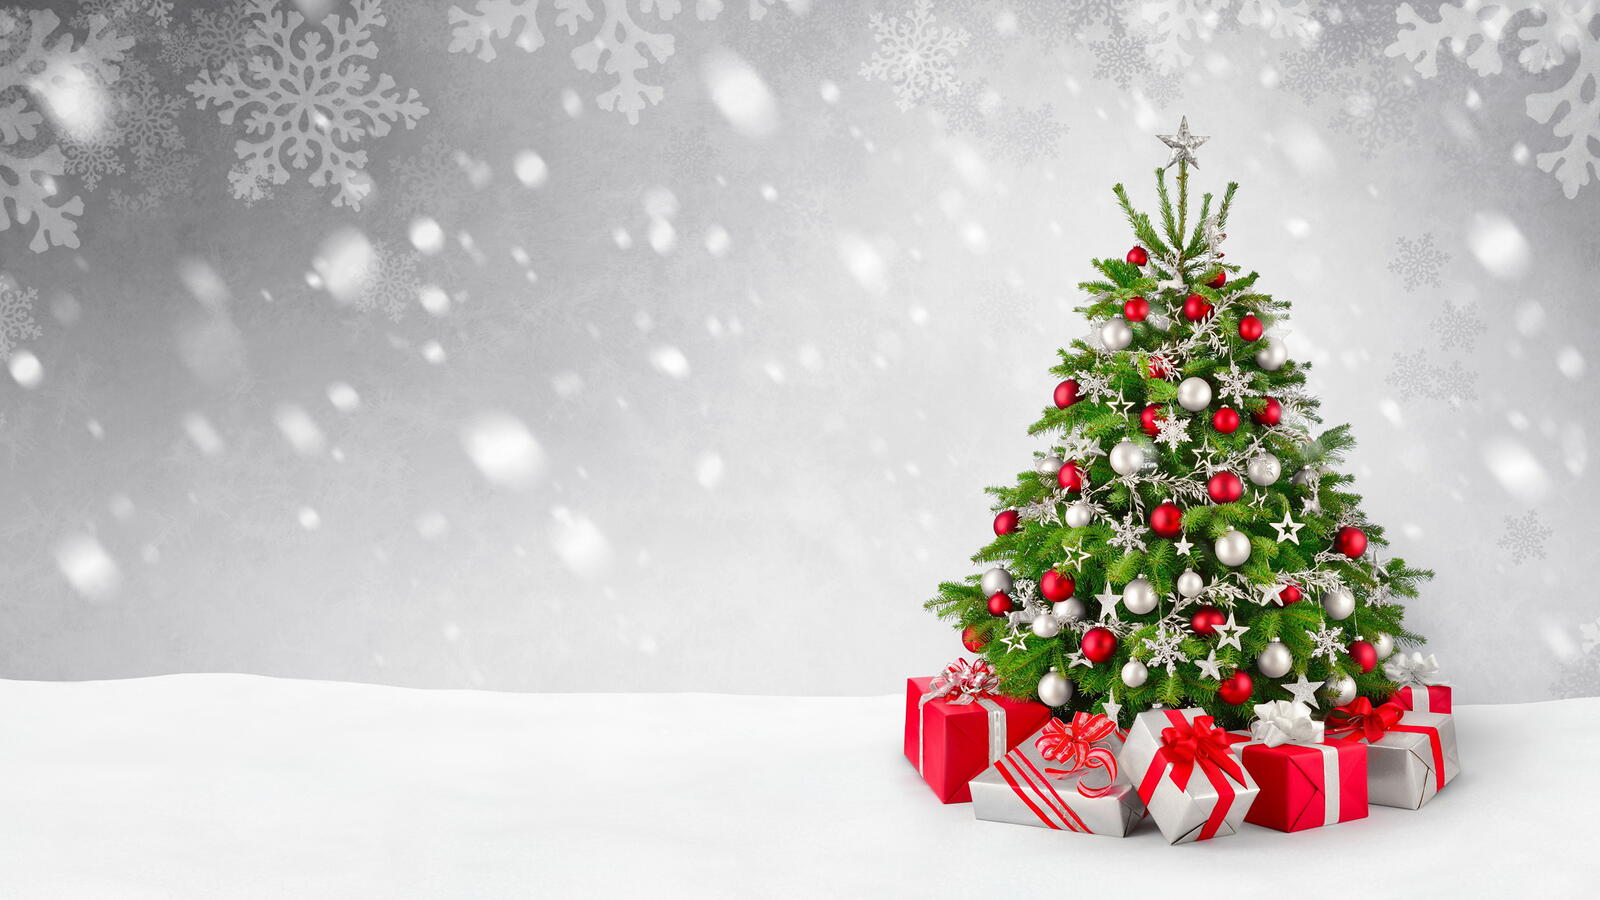 Wallpapers christmas tree decorated christmas tree holiday atmosphere on the desktop